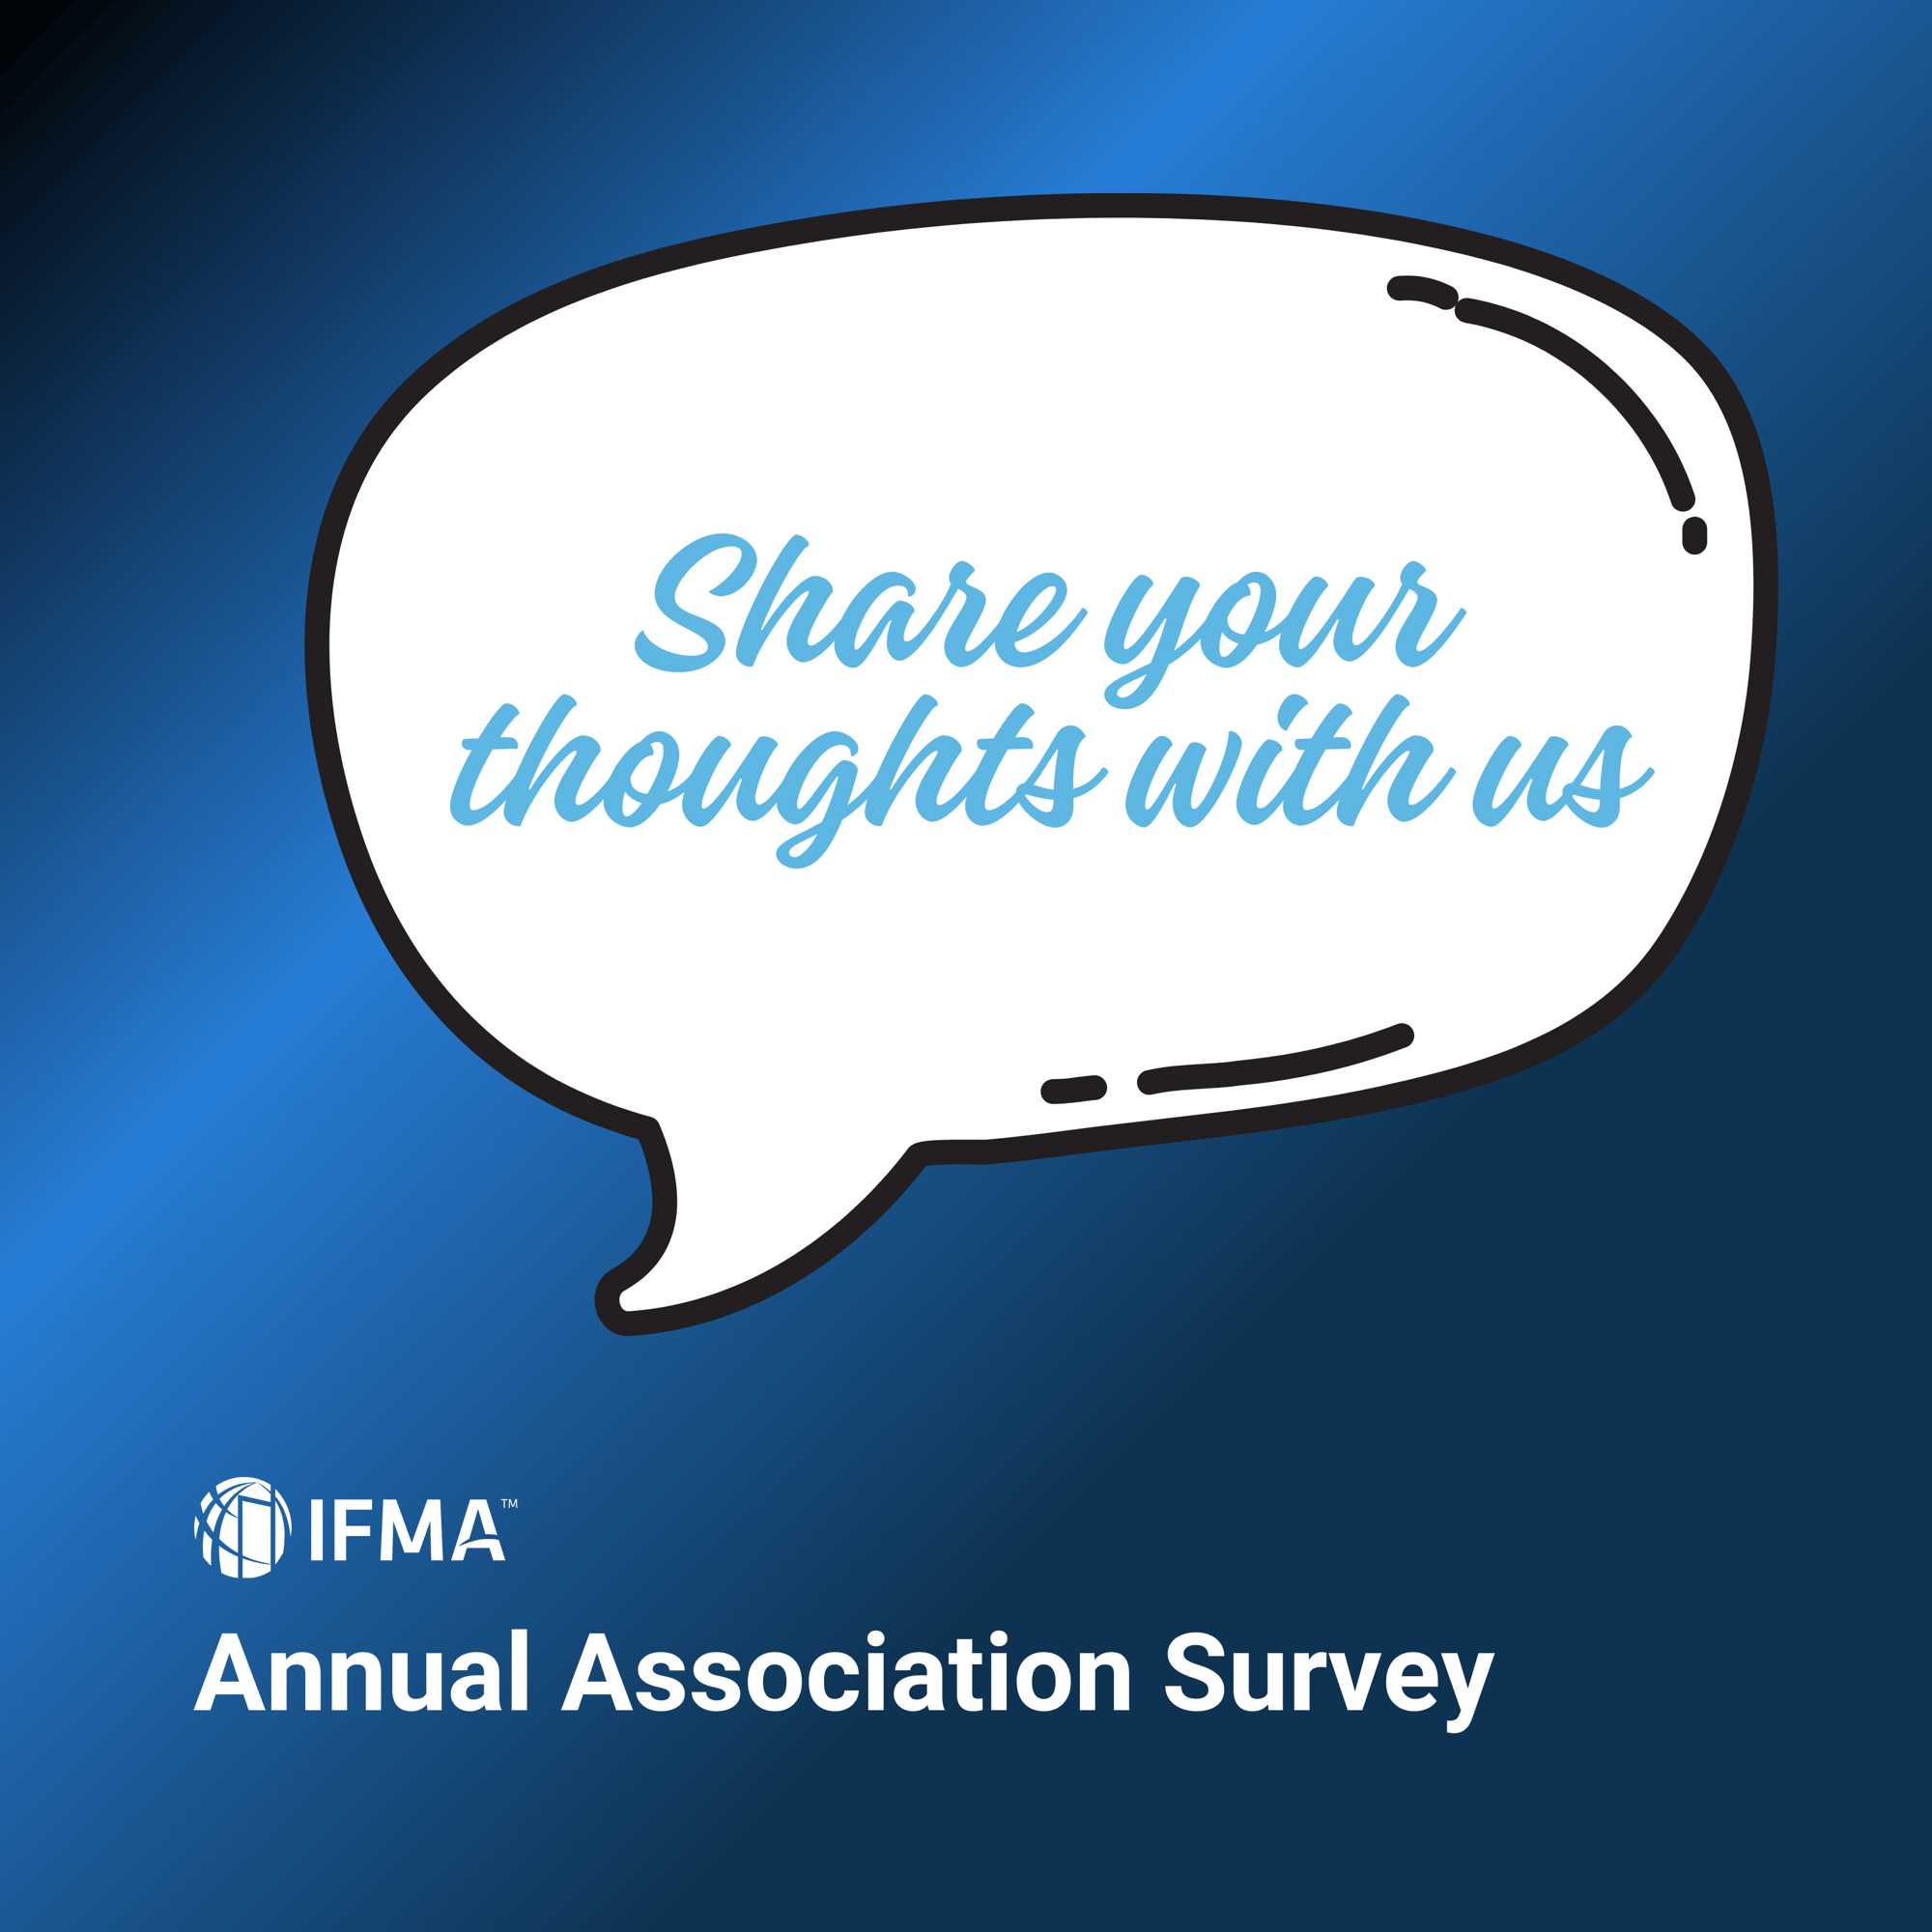 IFMA is deeply committed to helping our members thrive.